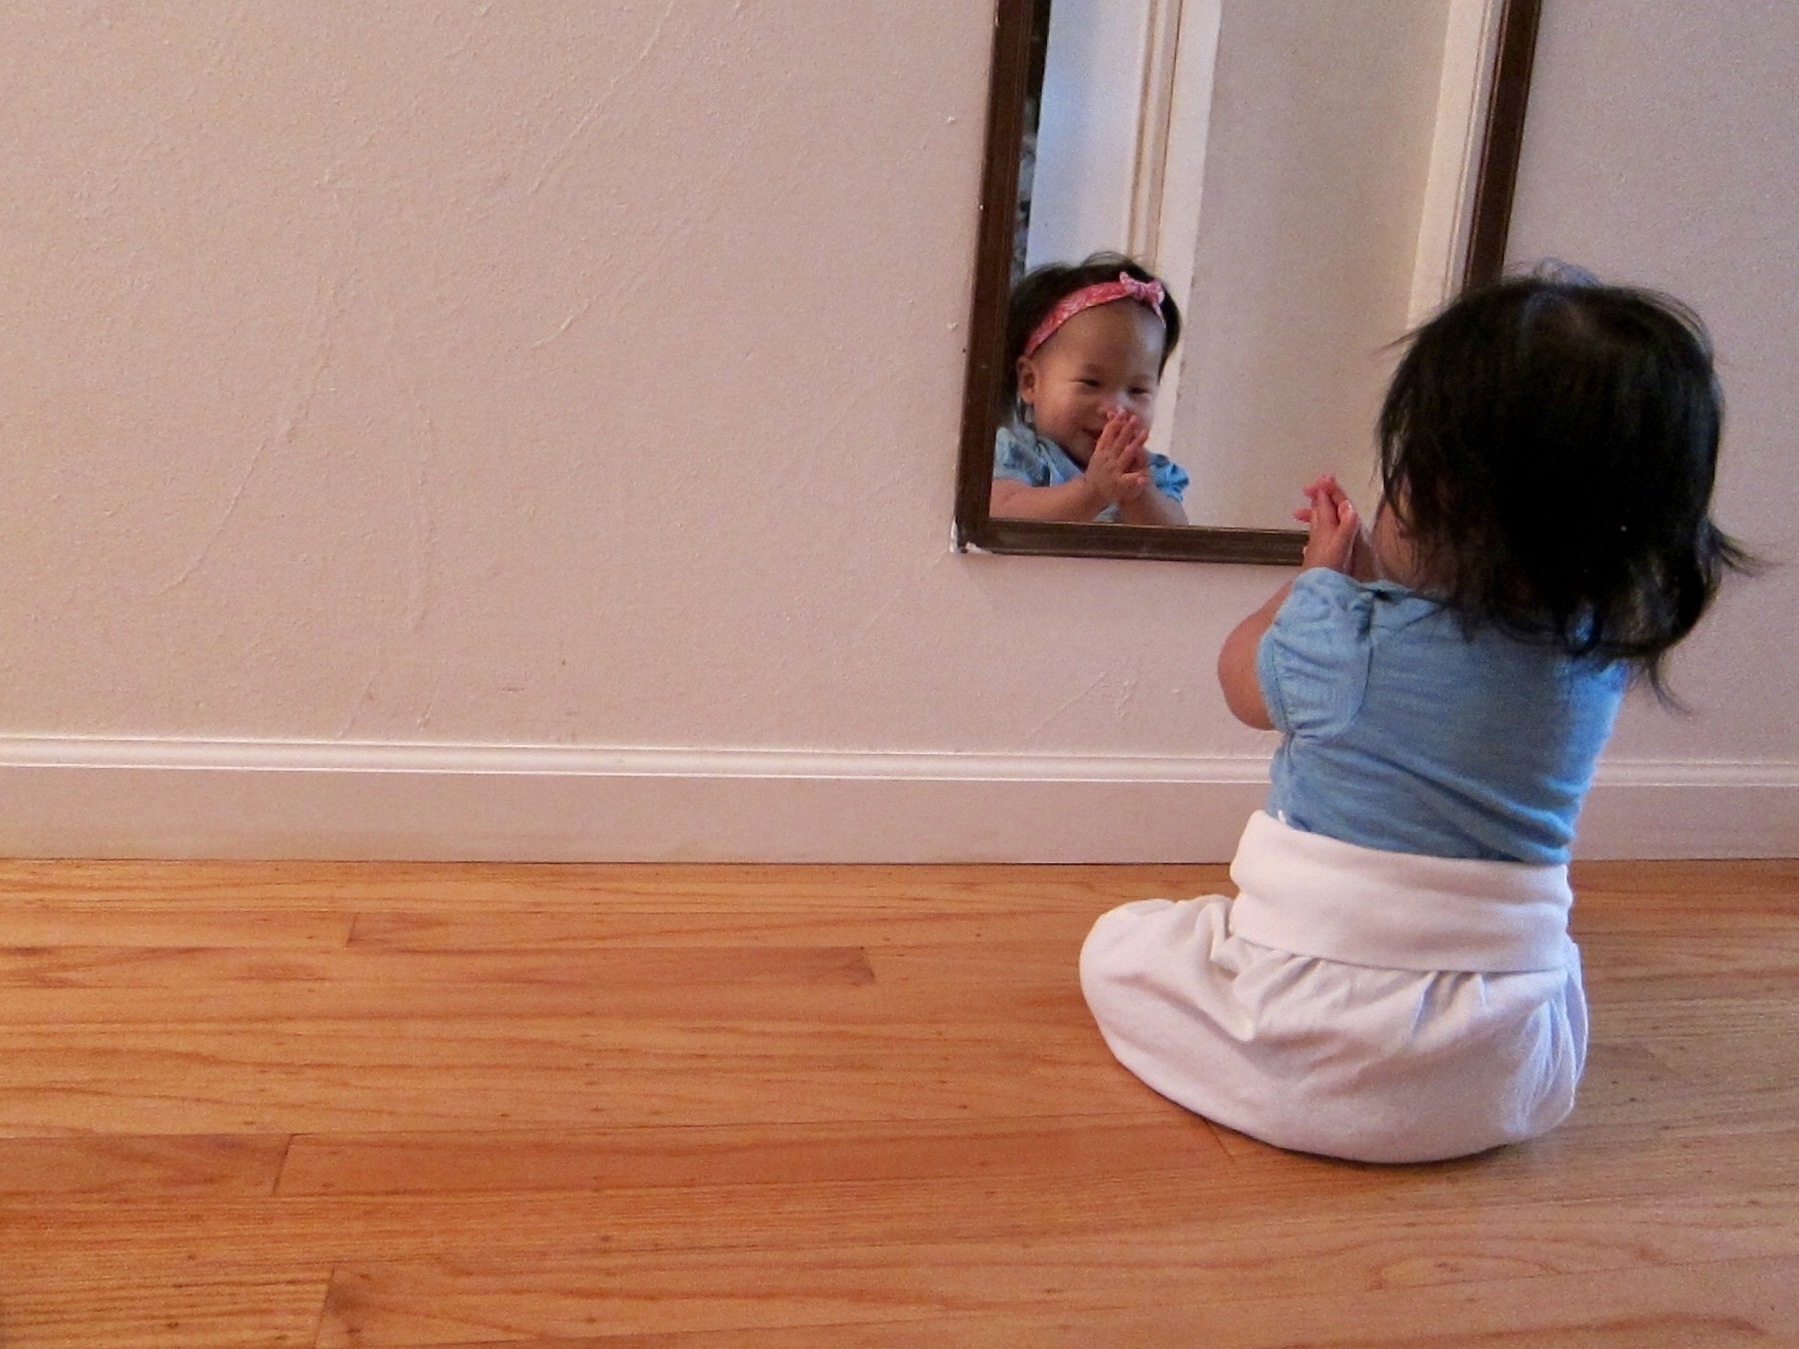 Mia and her reflection